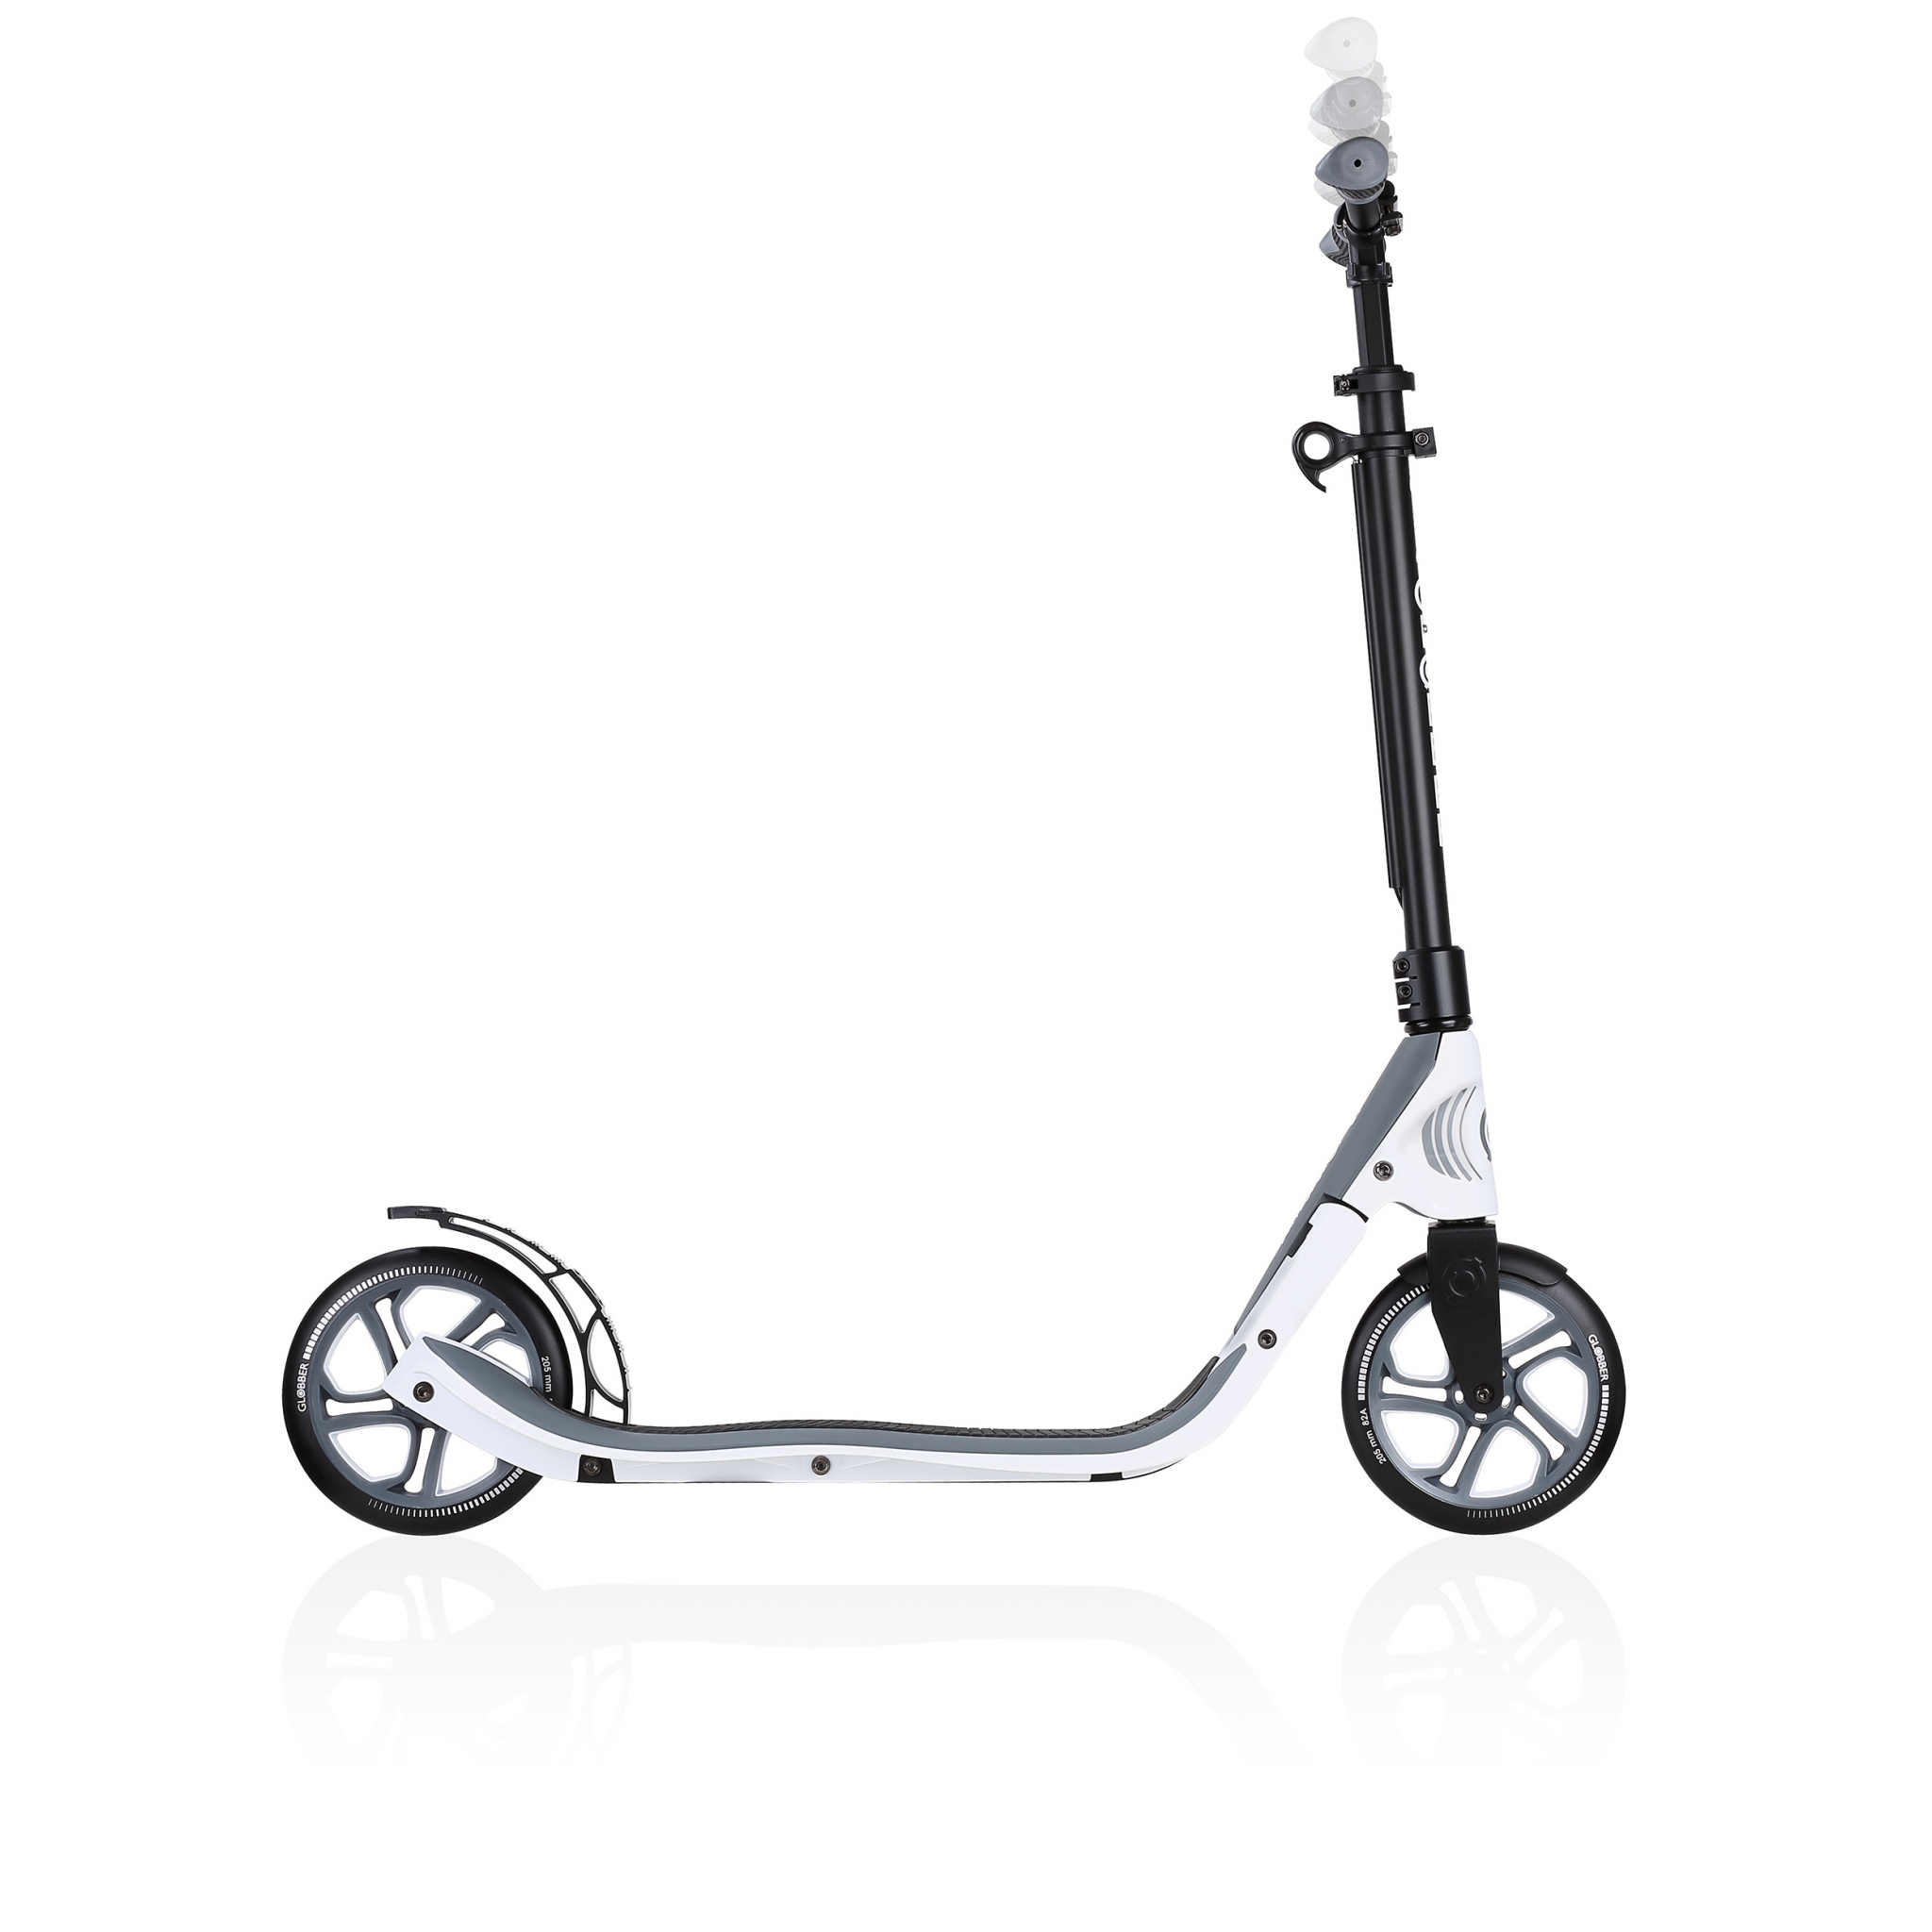 2-wheel foldable scooter for adults - Globber ONE NL 205 4